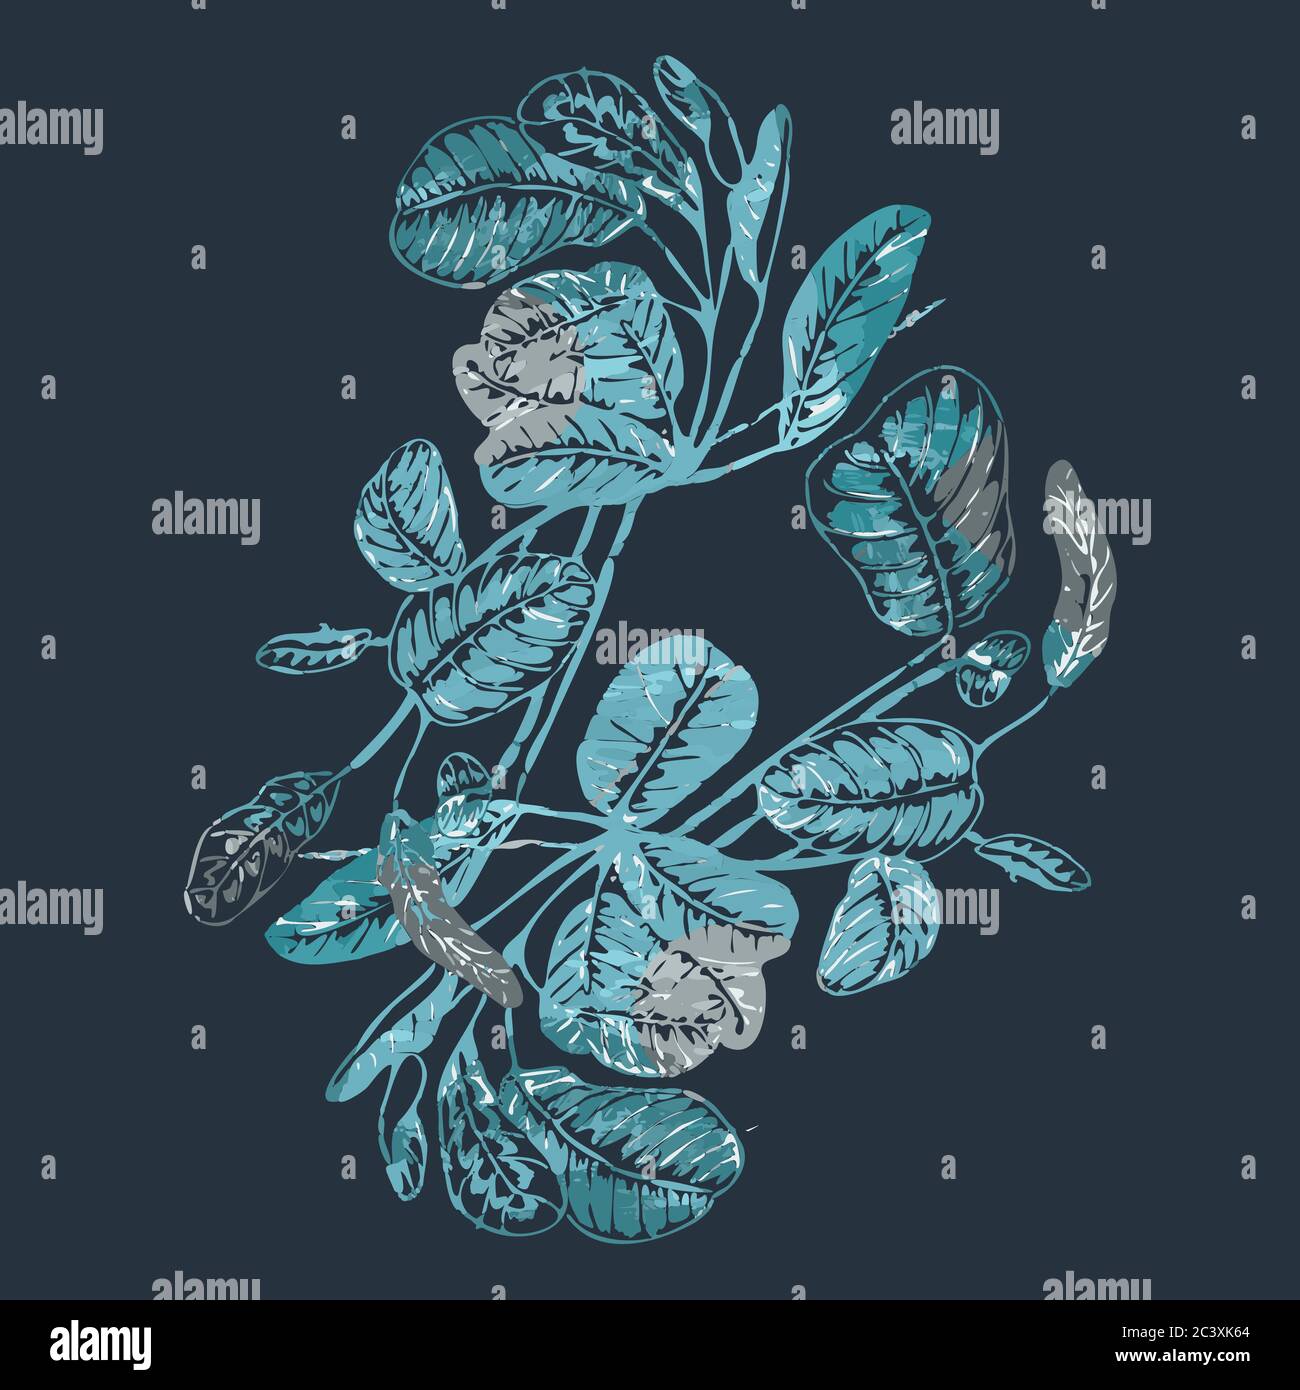 Vector illustration of a bundle of plants. Stock Vector